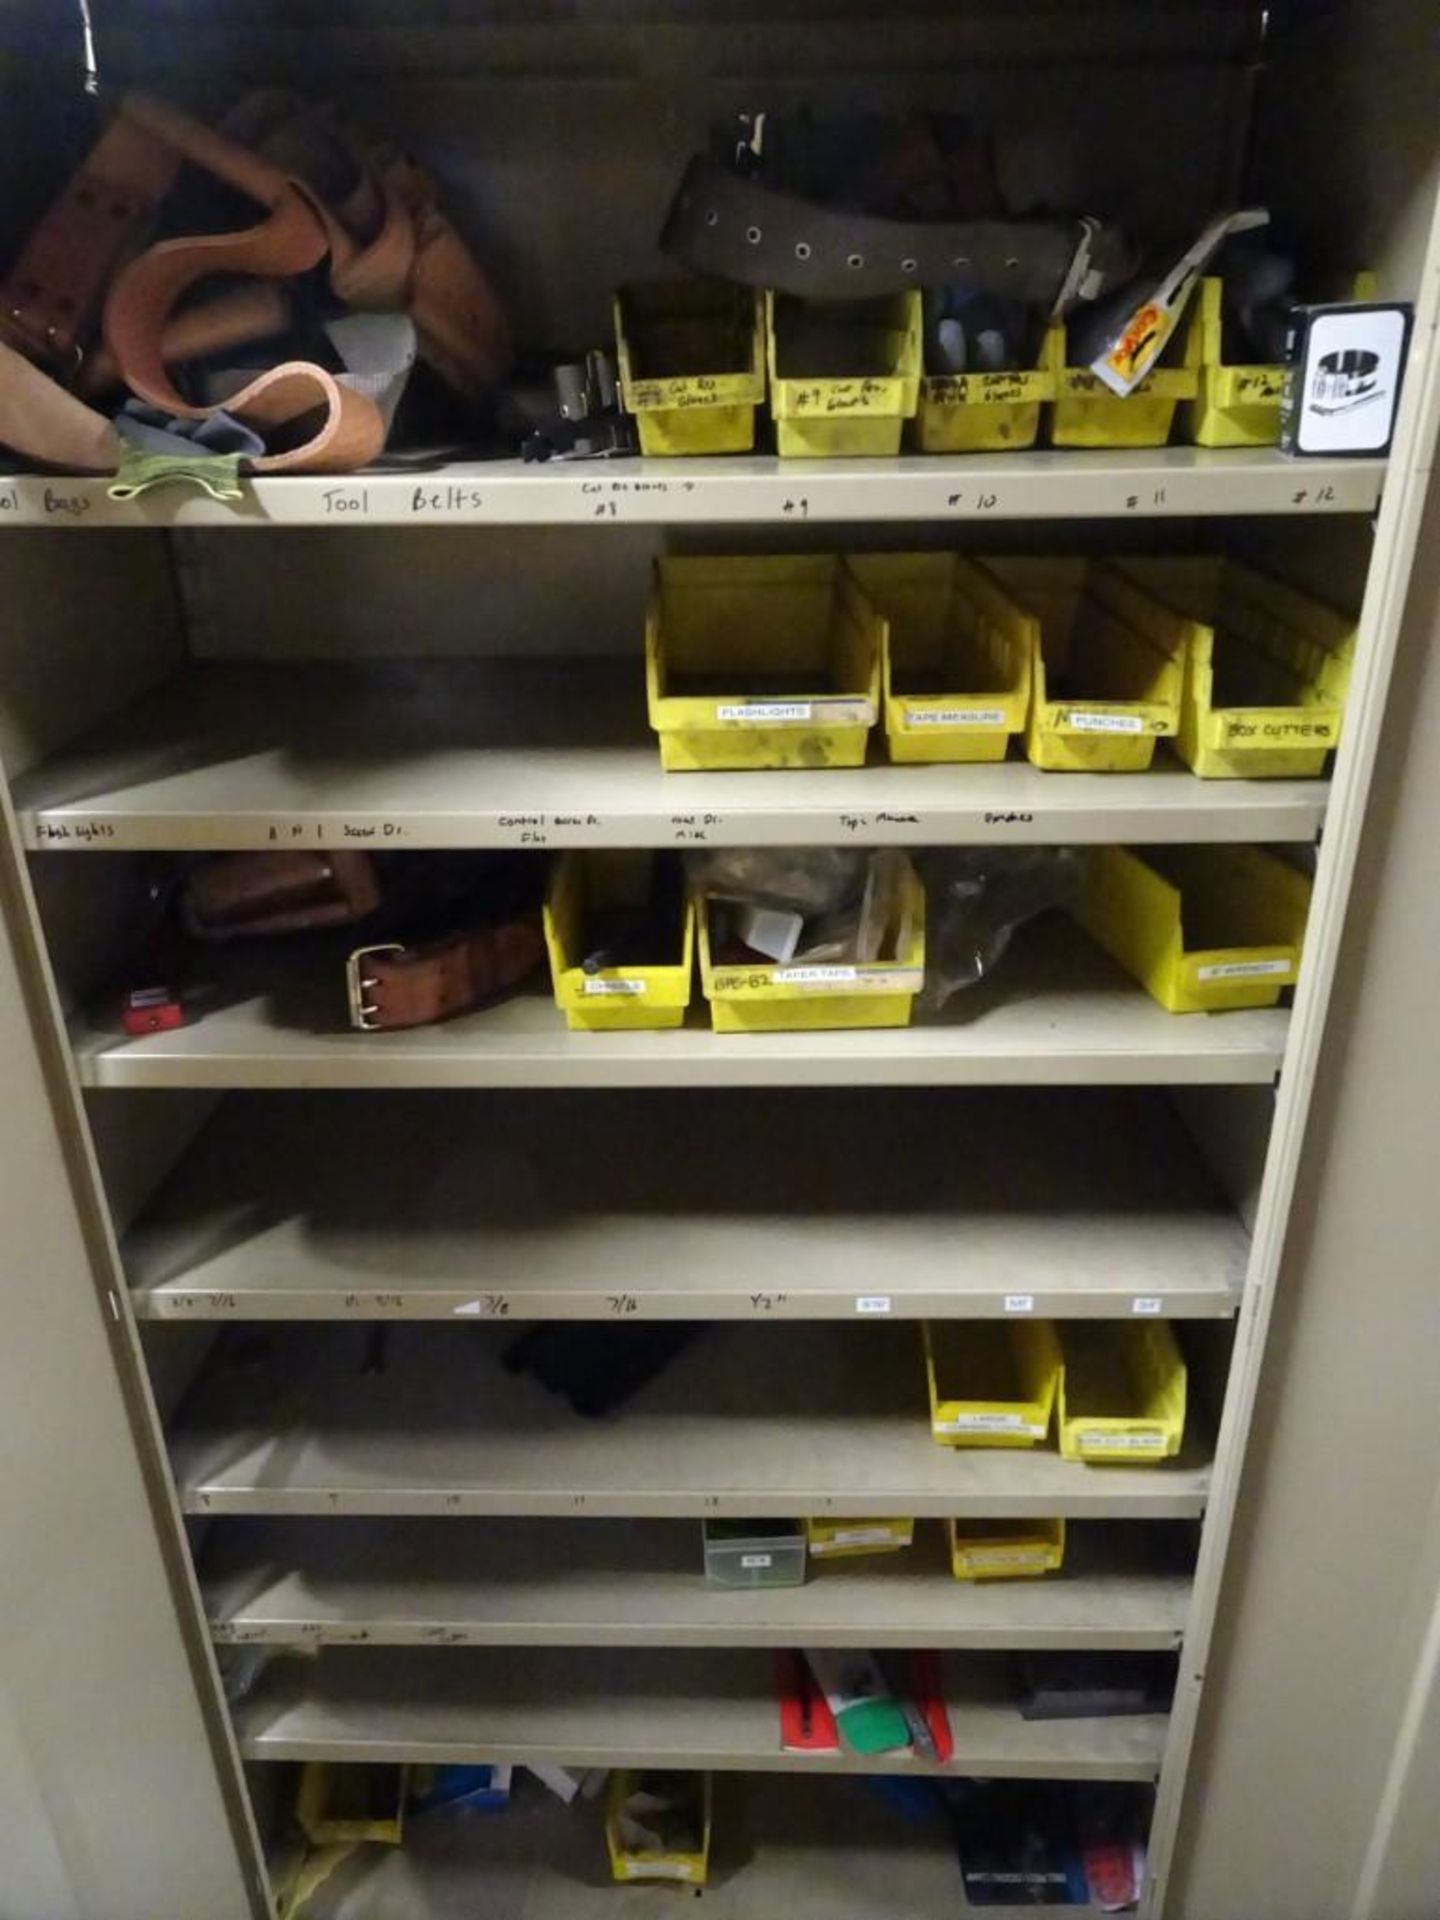 (6) 2 Door Storage Cabinets w/ Spare Parts Consisting of: Belts, Fans, Fuses, Wire, and Valves - Image 2 of 8